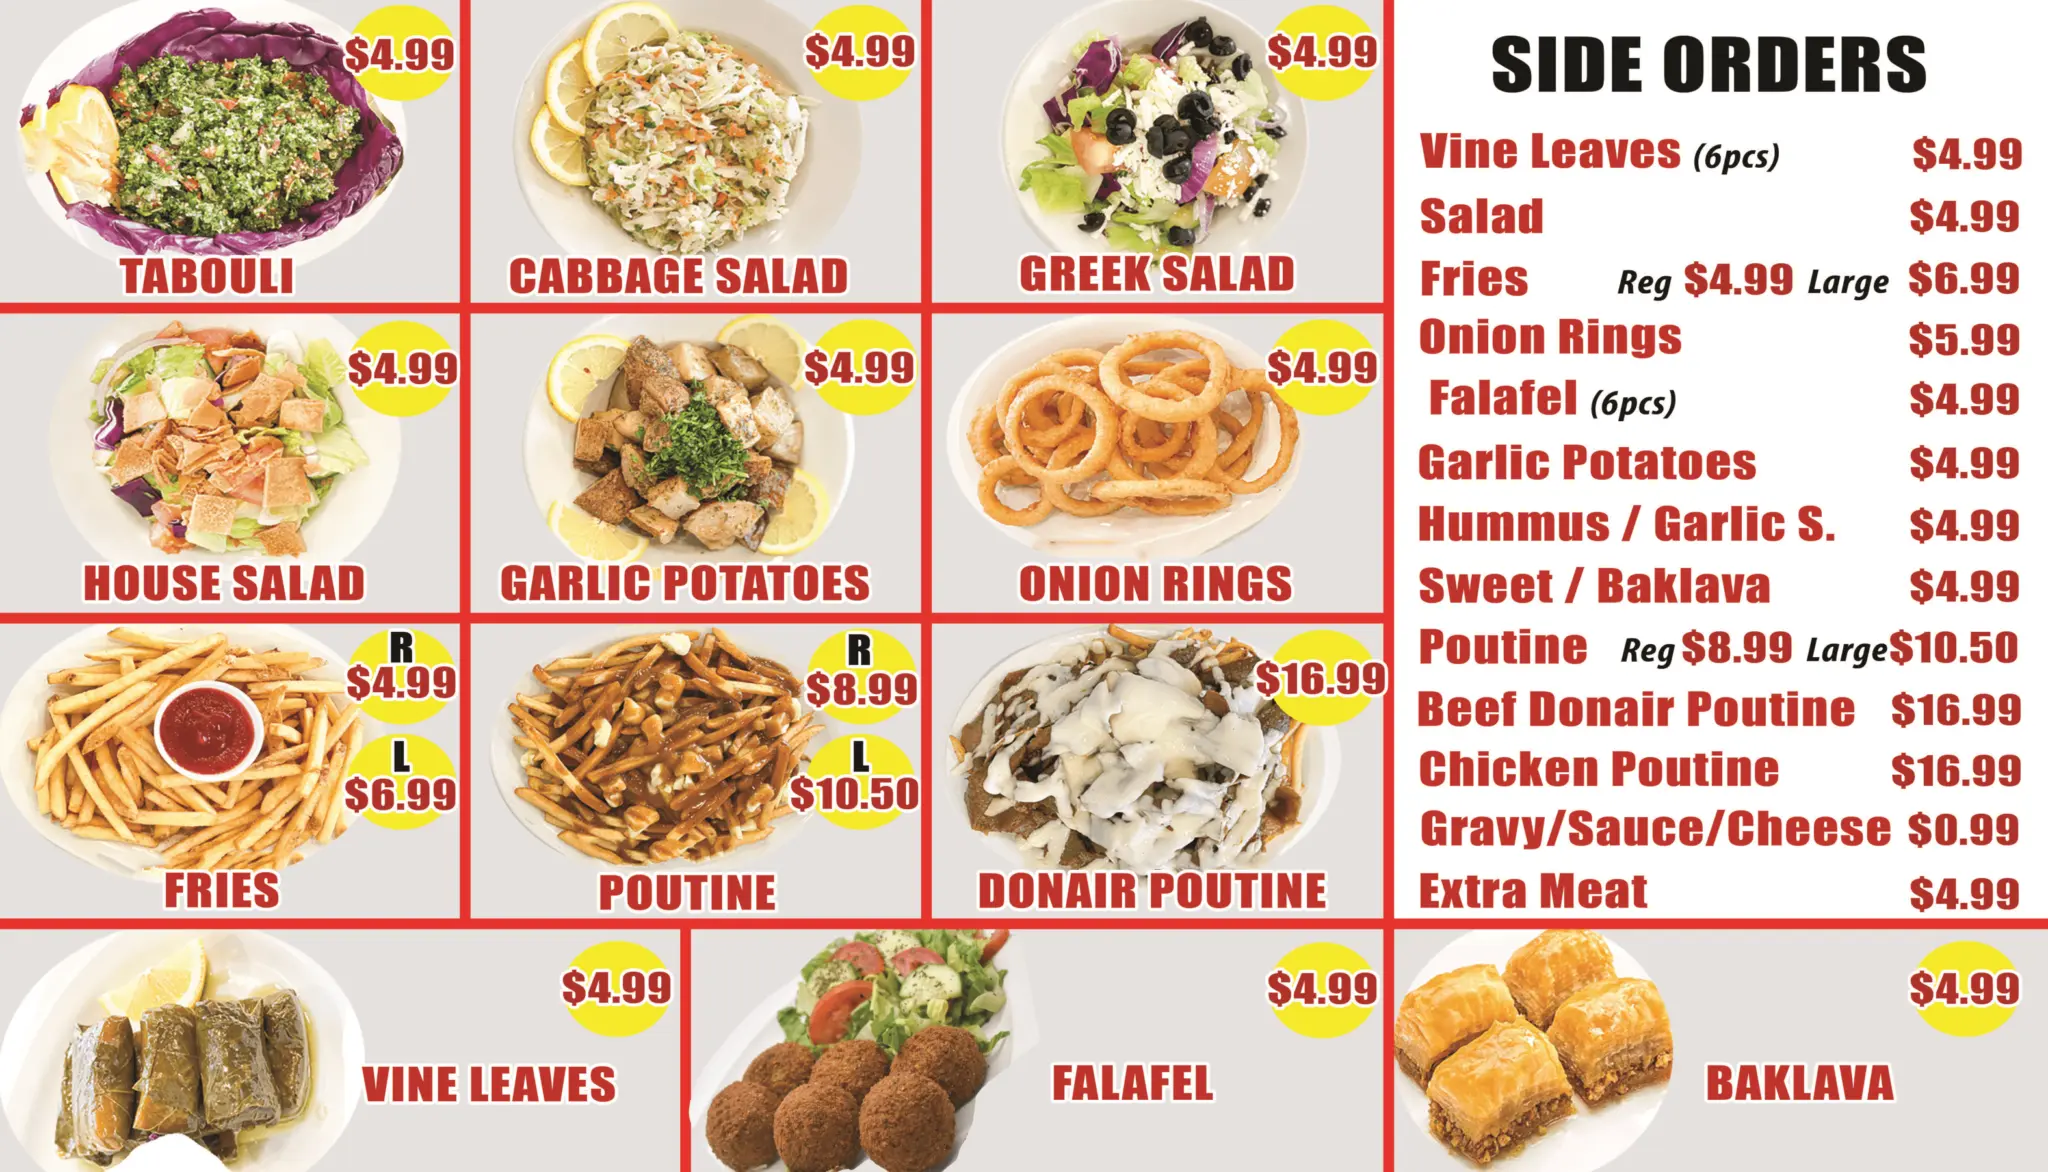 Side Orders and French Fries And Tabouli